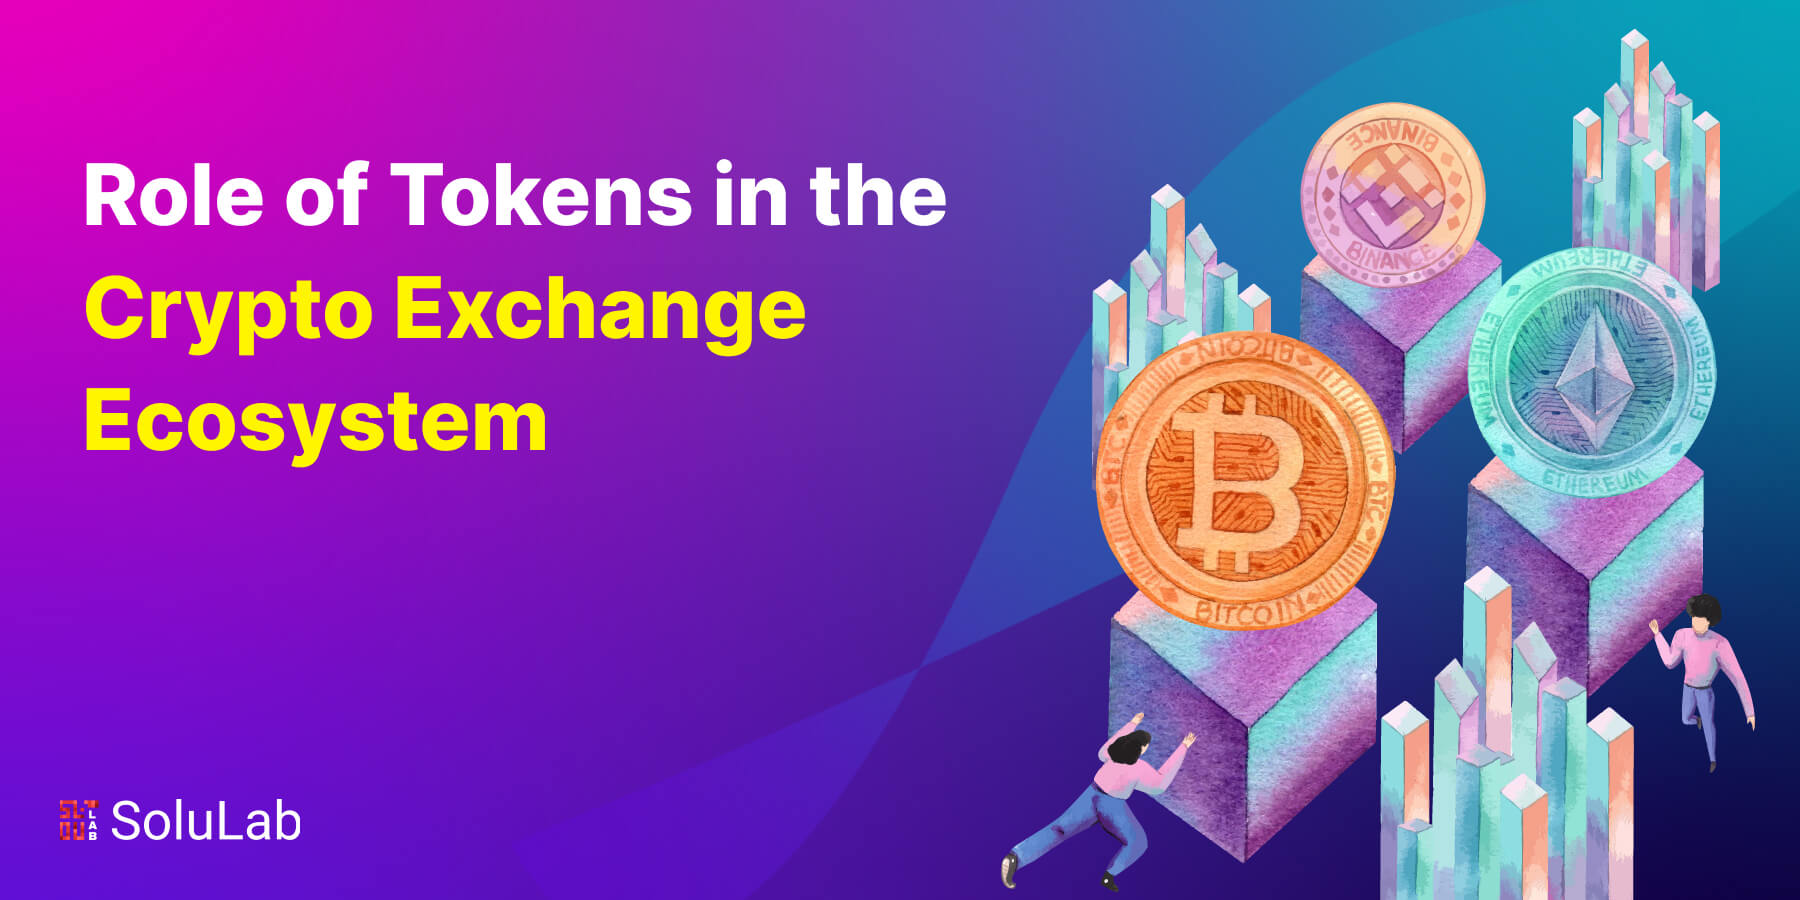 Role of Tokens in the Crypto Exchange Ecosystem